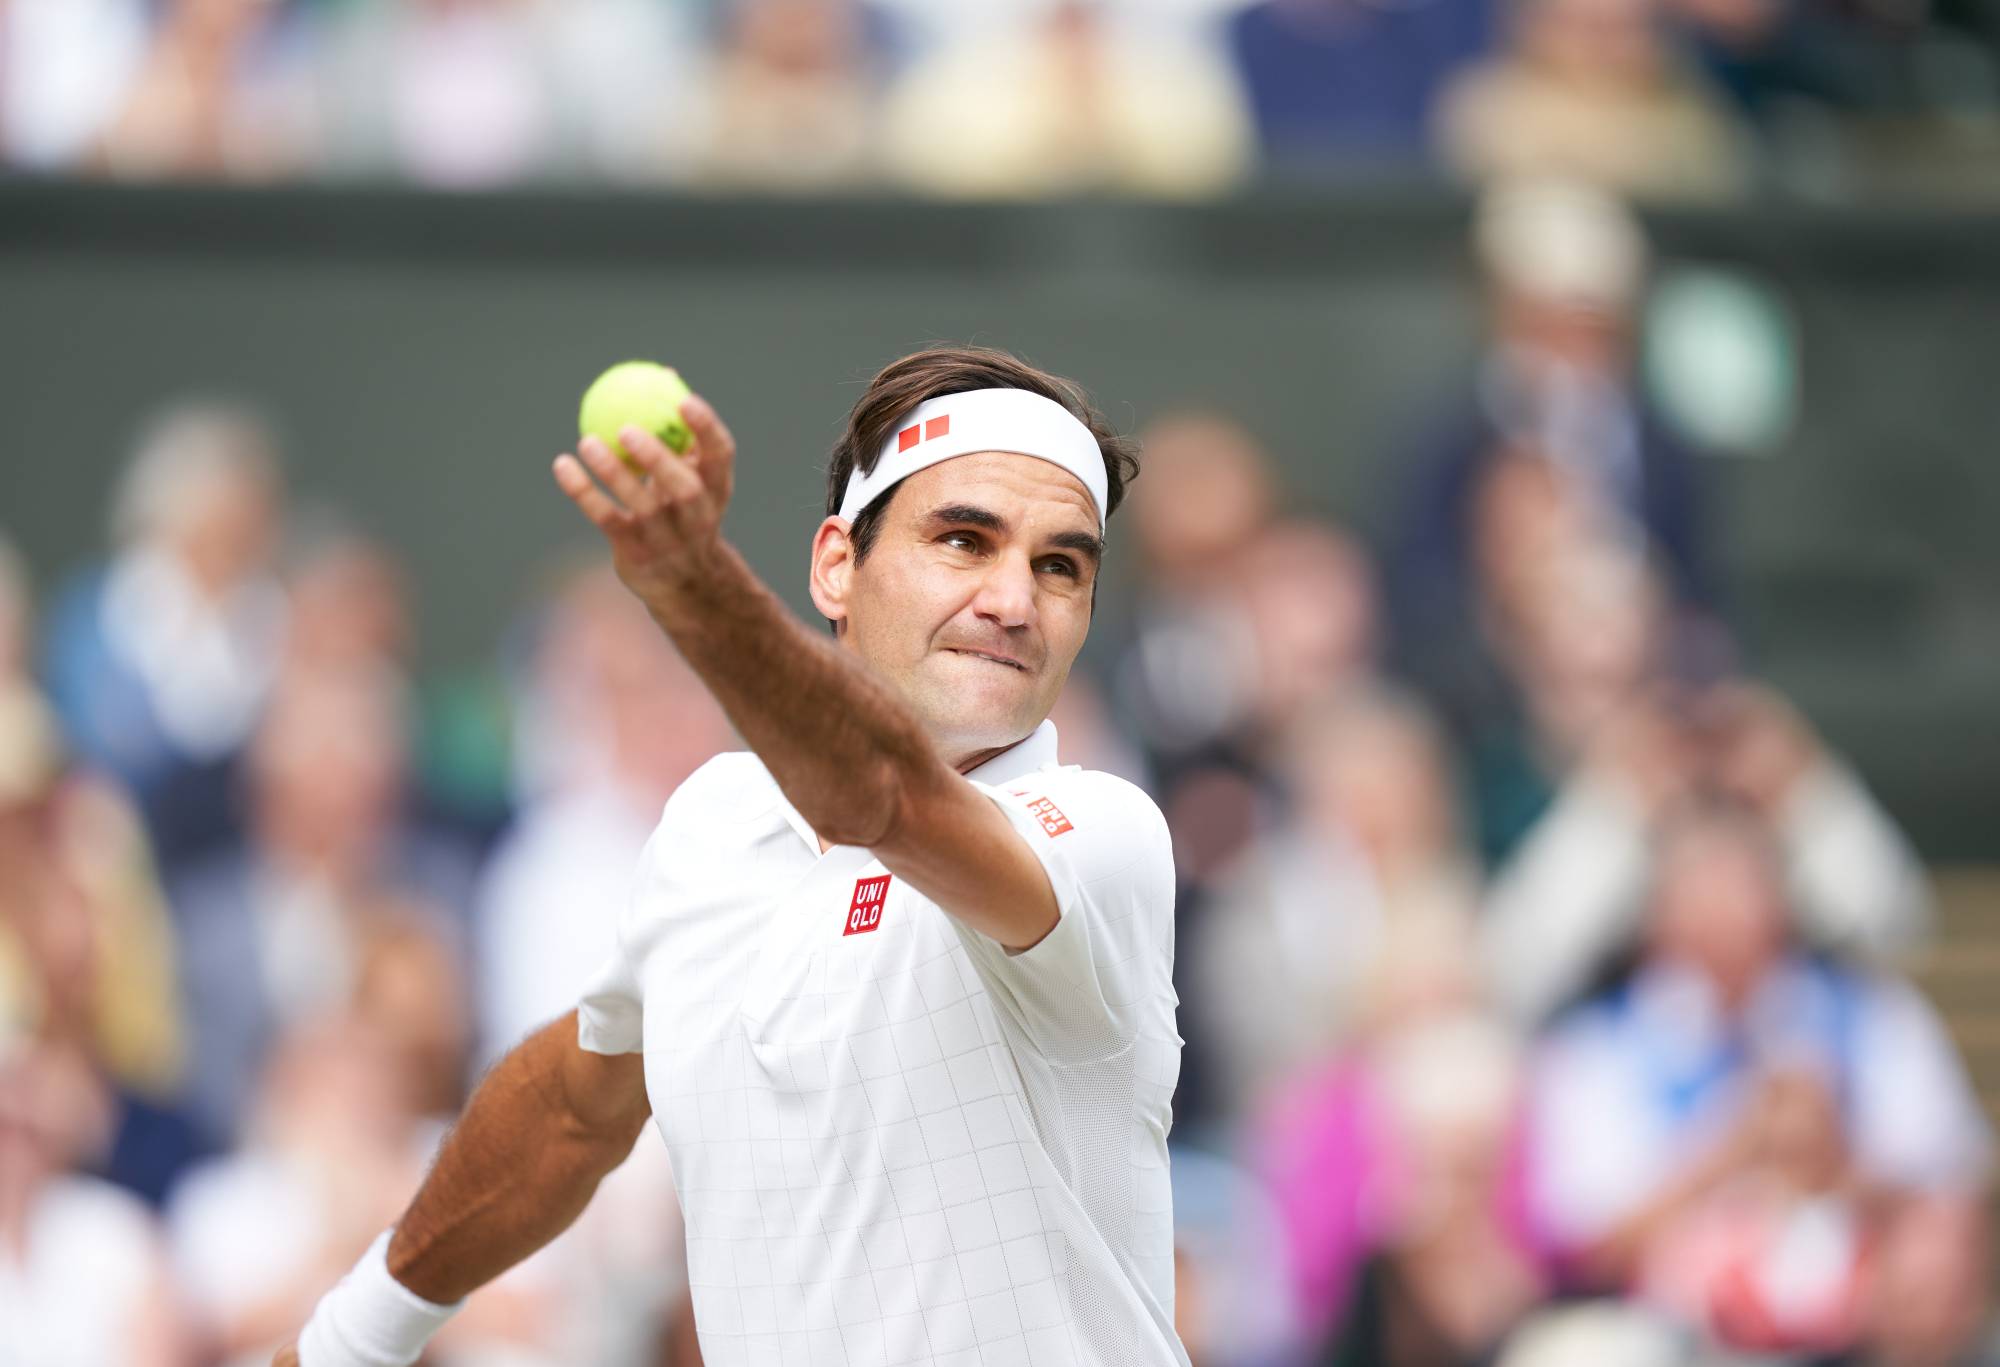 Roger Federer is planning to play at the Laver Cup and in Basel later this year. | USA TODAY / VIA REUTERS